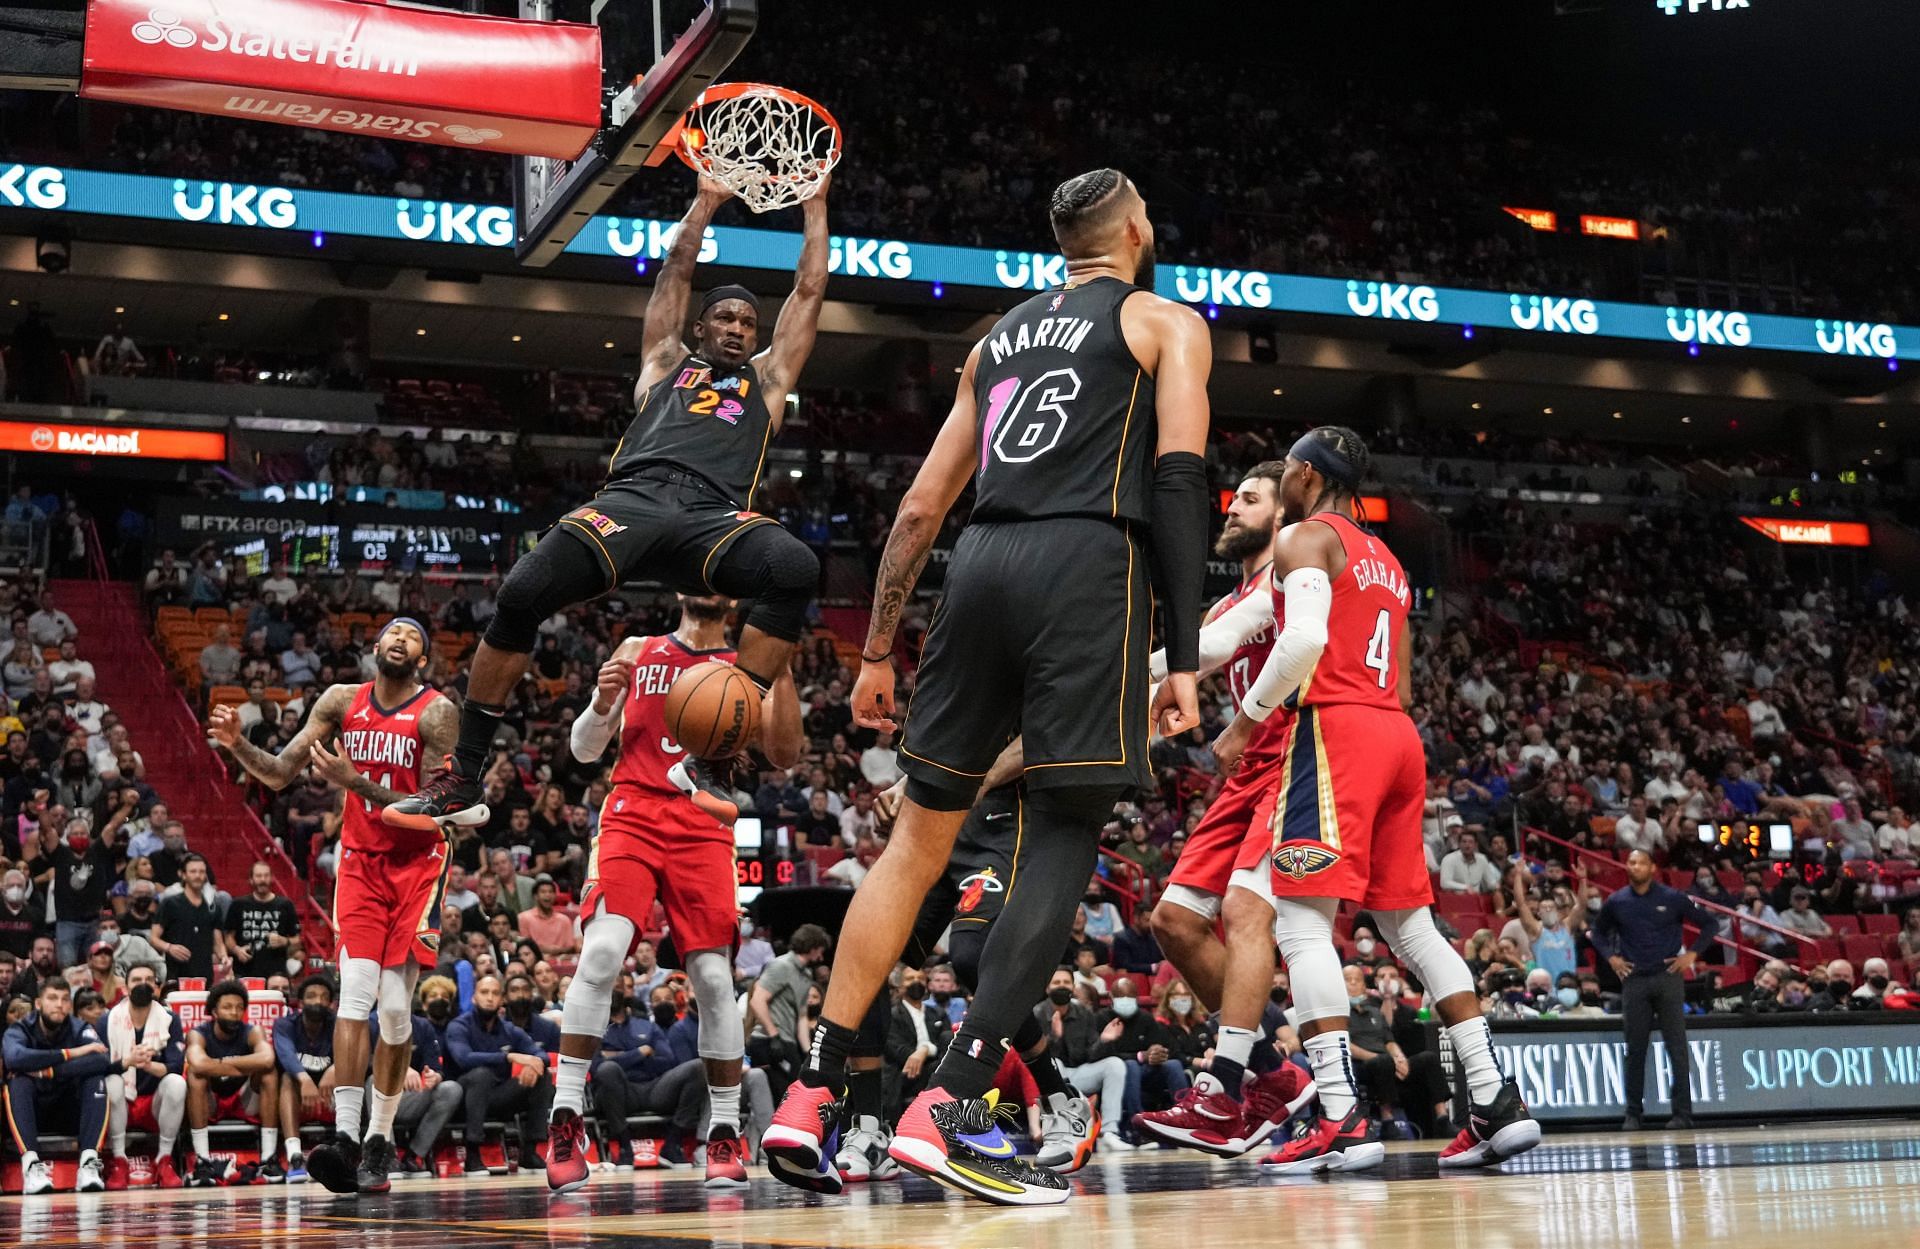 The Miami Heat welcomed back Jimmy Butler with a resounding win over the New Orleans Pelicans.